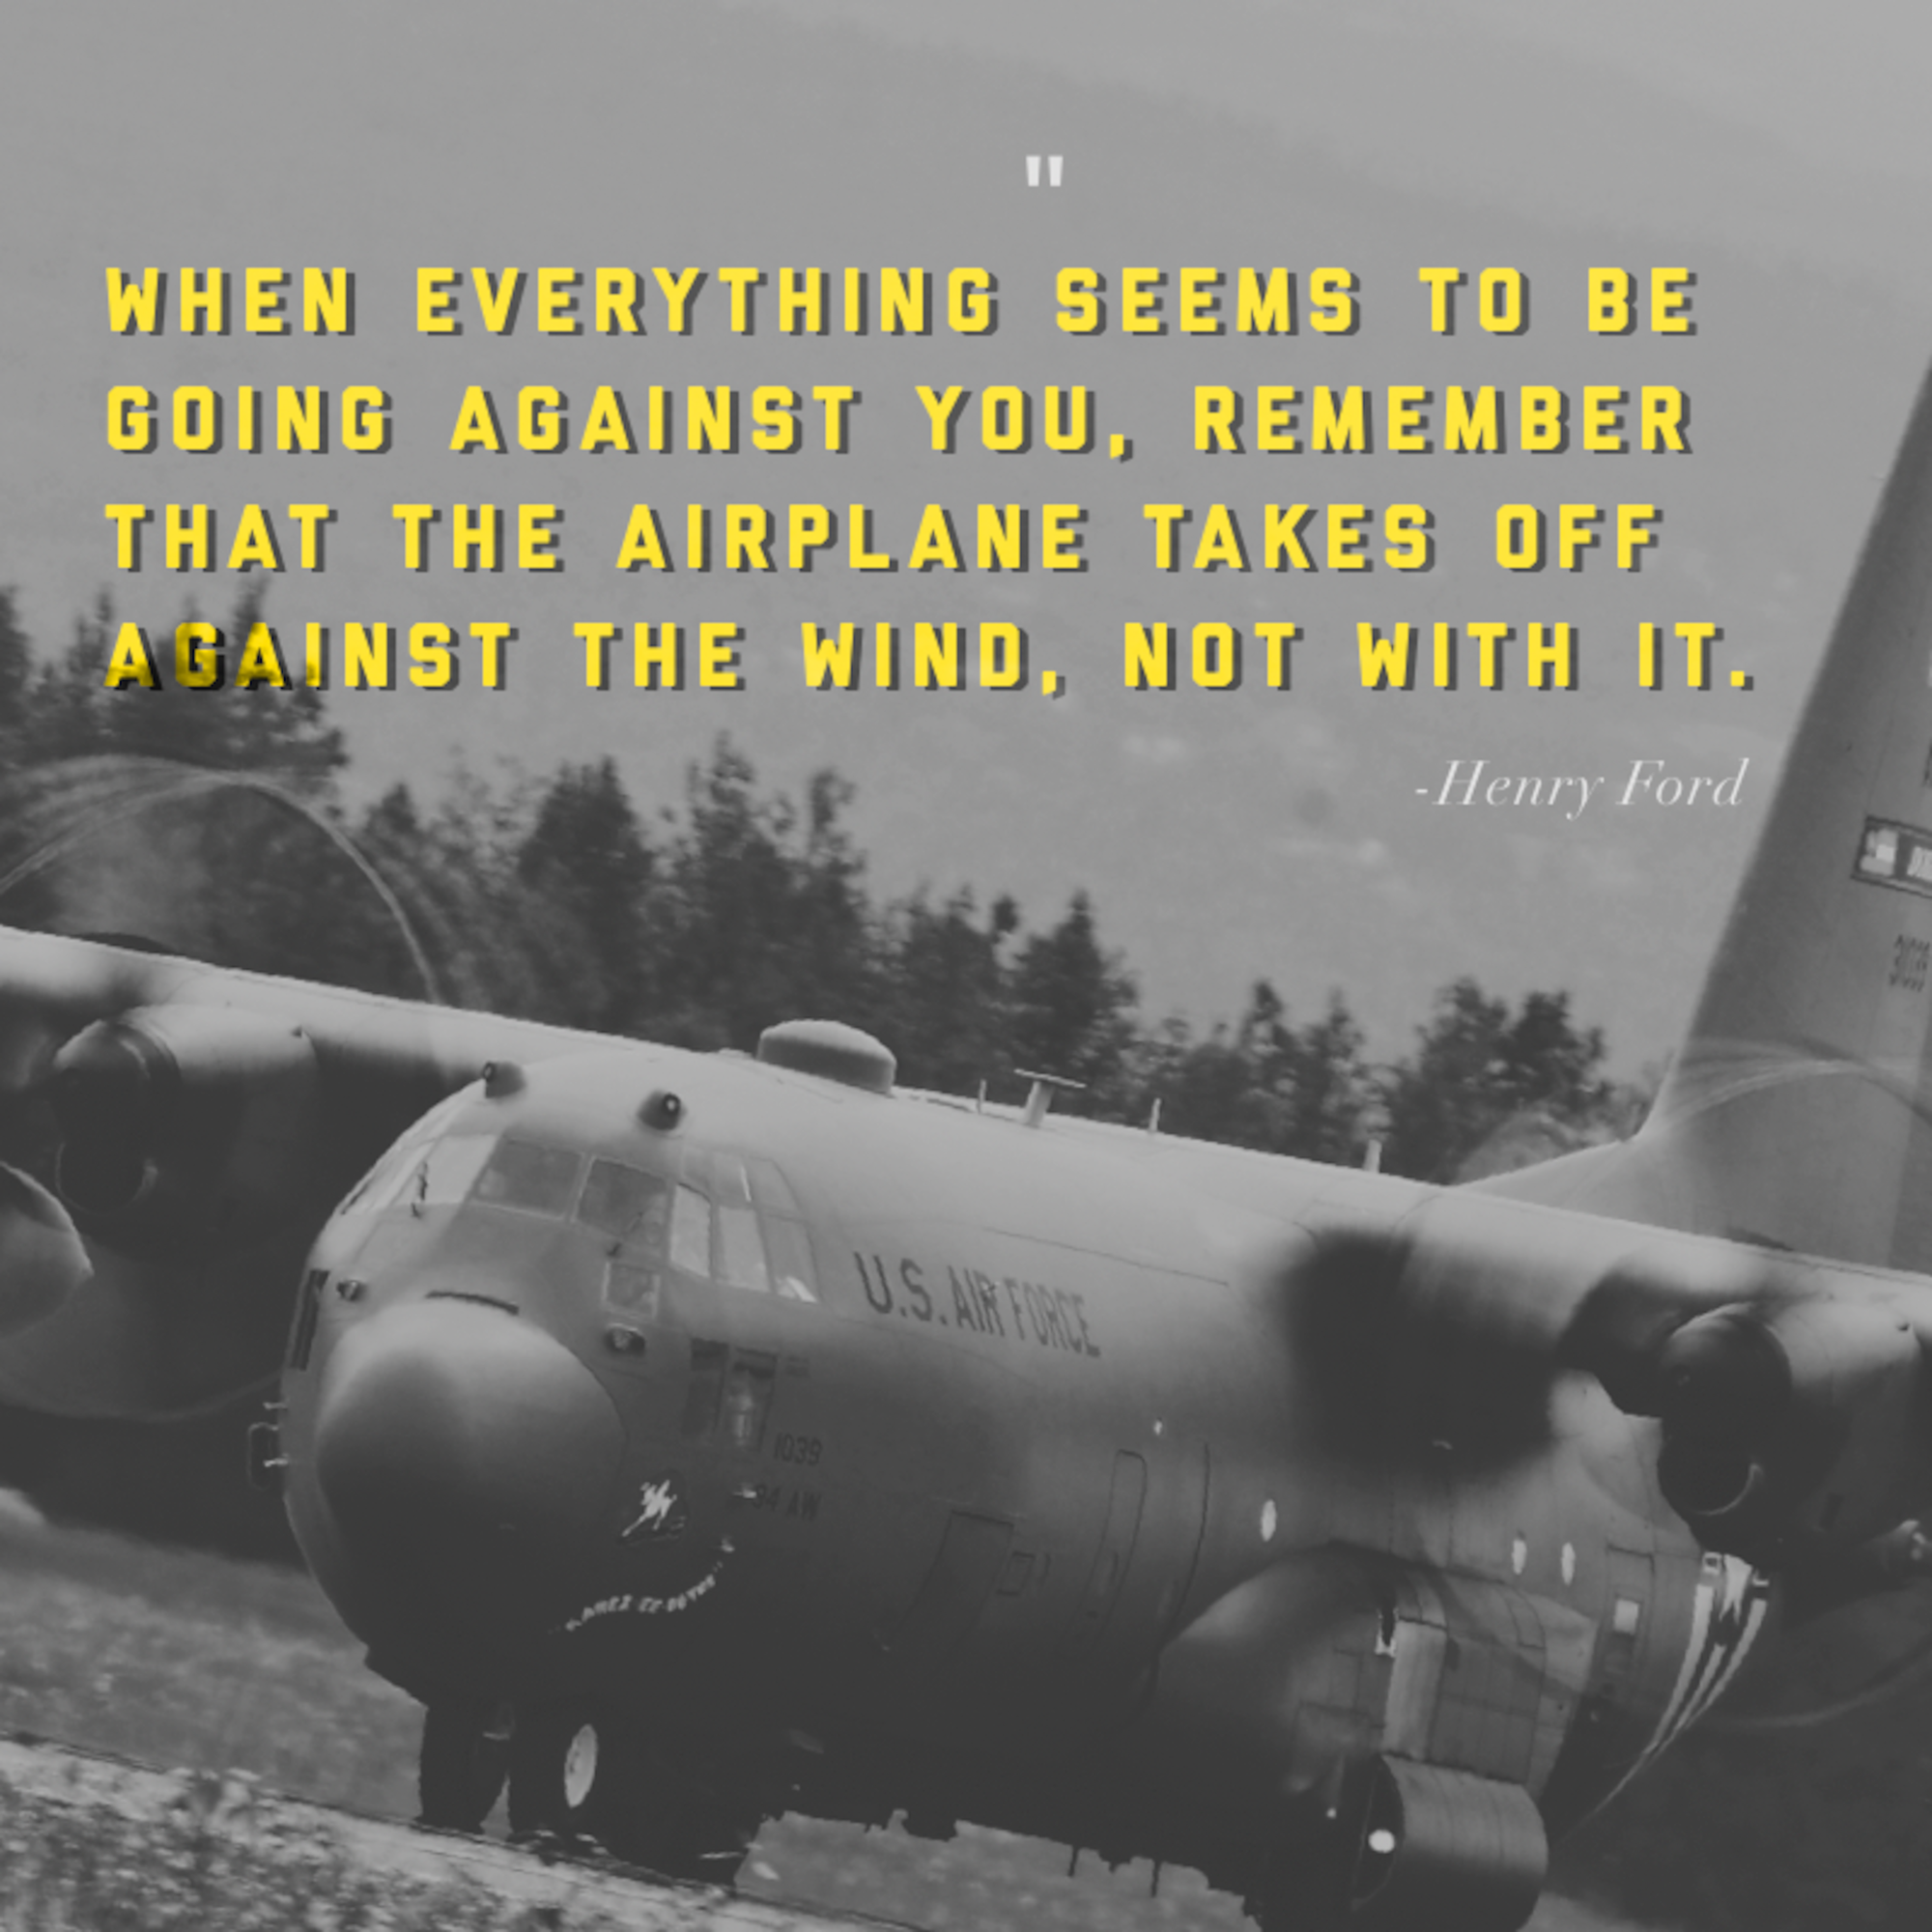 This week's motivation is from Henry Ford, an automobile manufacturer, who said: 

"When everything seems to be going against you, remember that the airplane takes off against the wind, not with it."

(U.S. Air Force graphic/Tech. Sgt. Andrew Park)